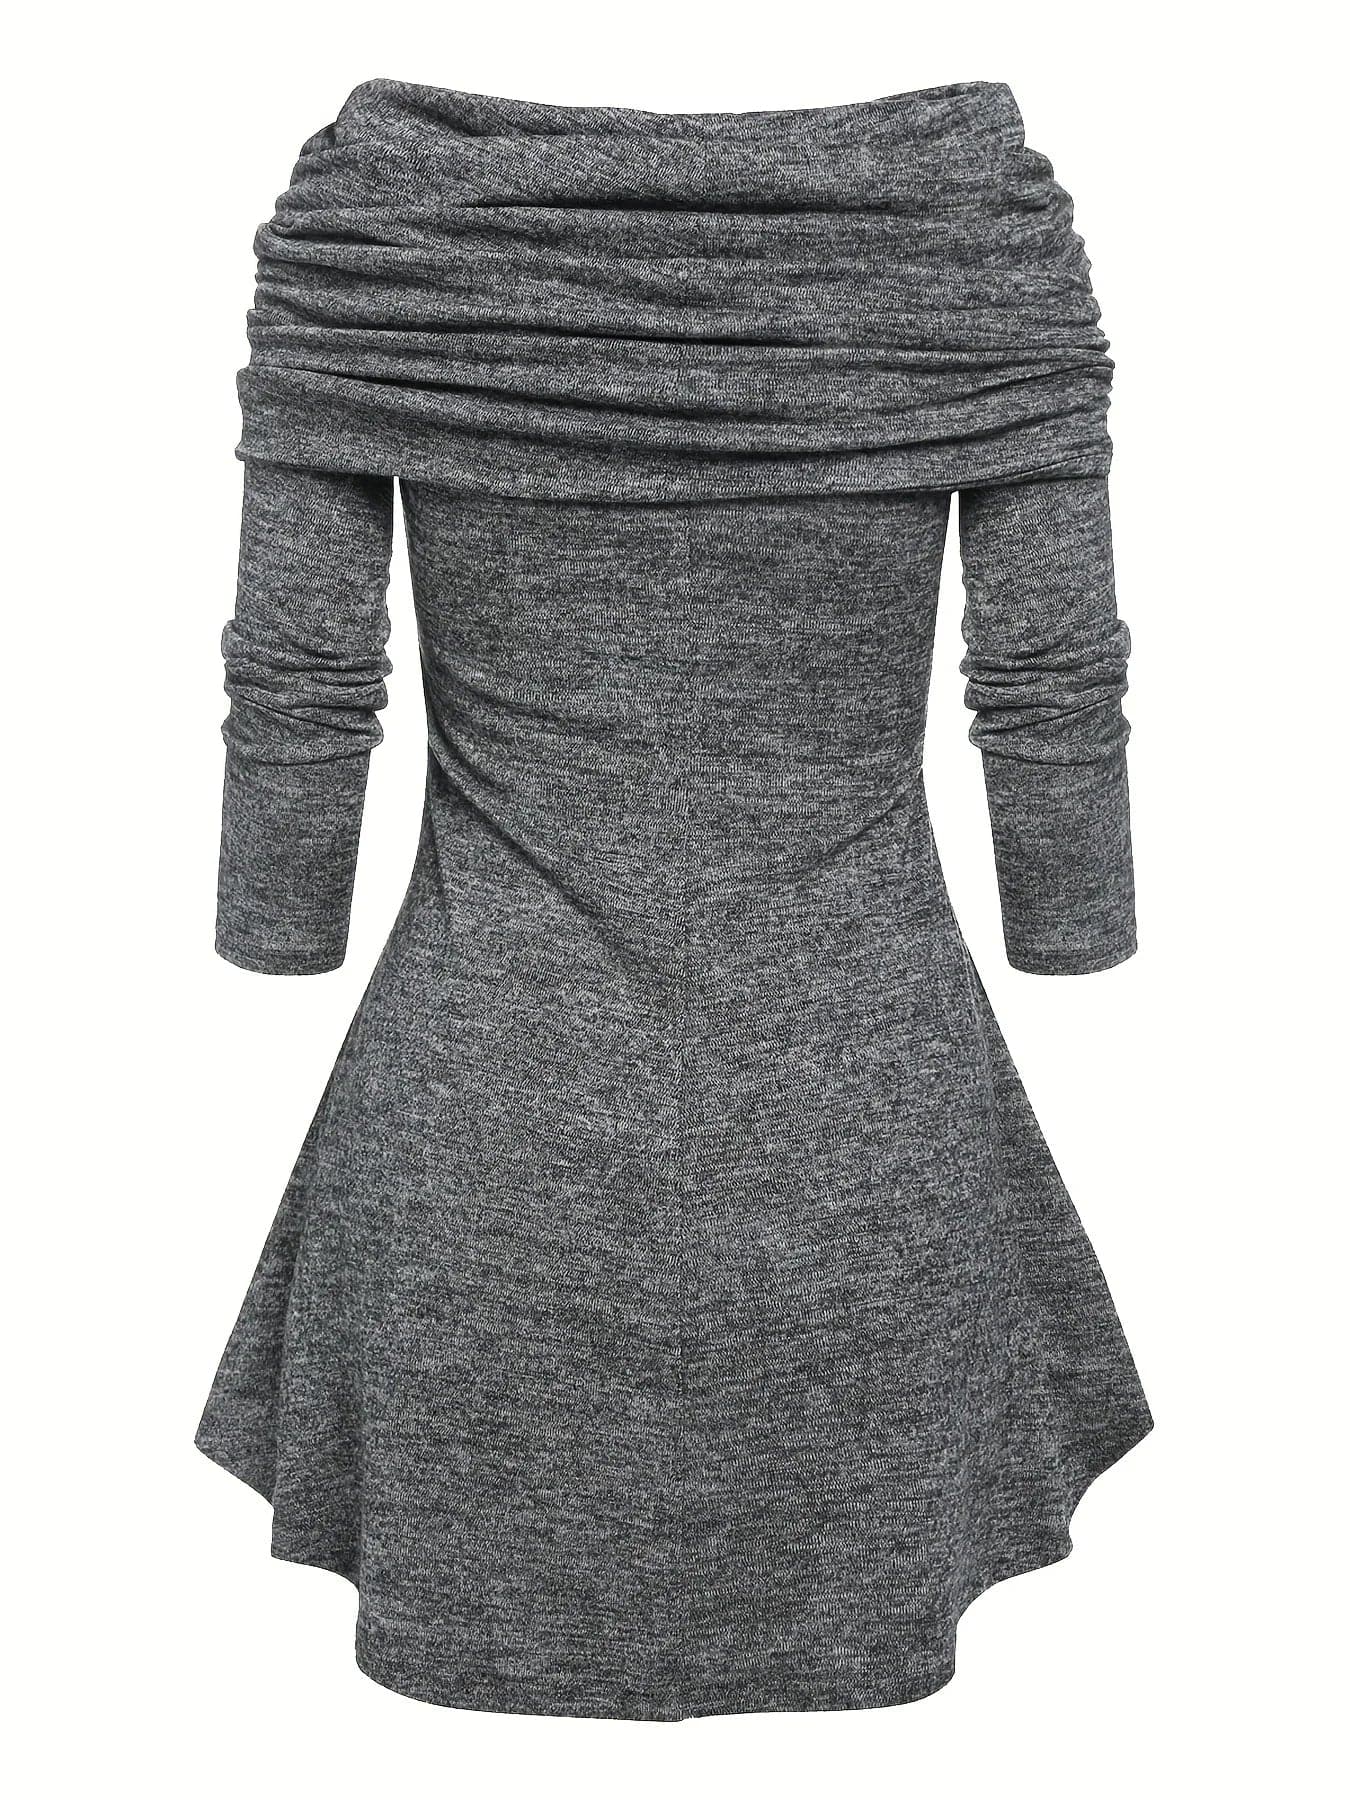 Ruched Asymmetrical Dresses - Wandering Woman